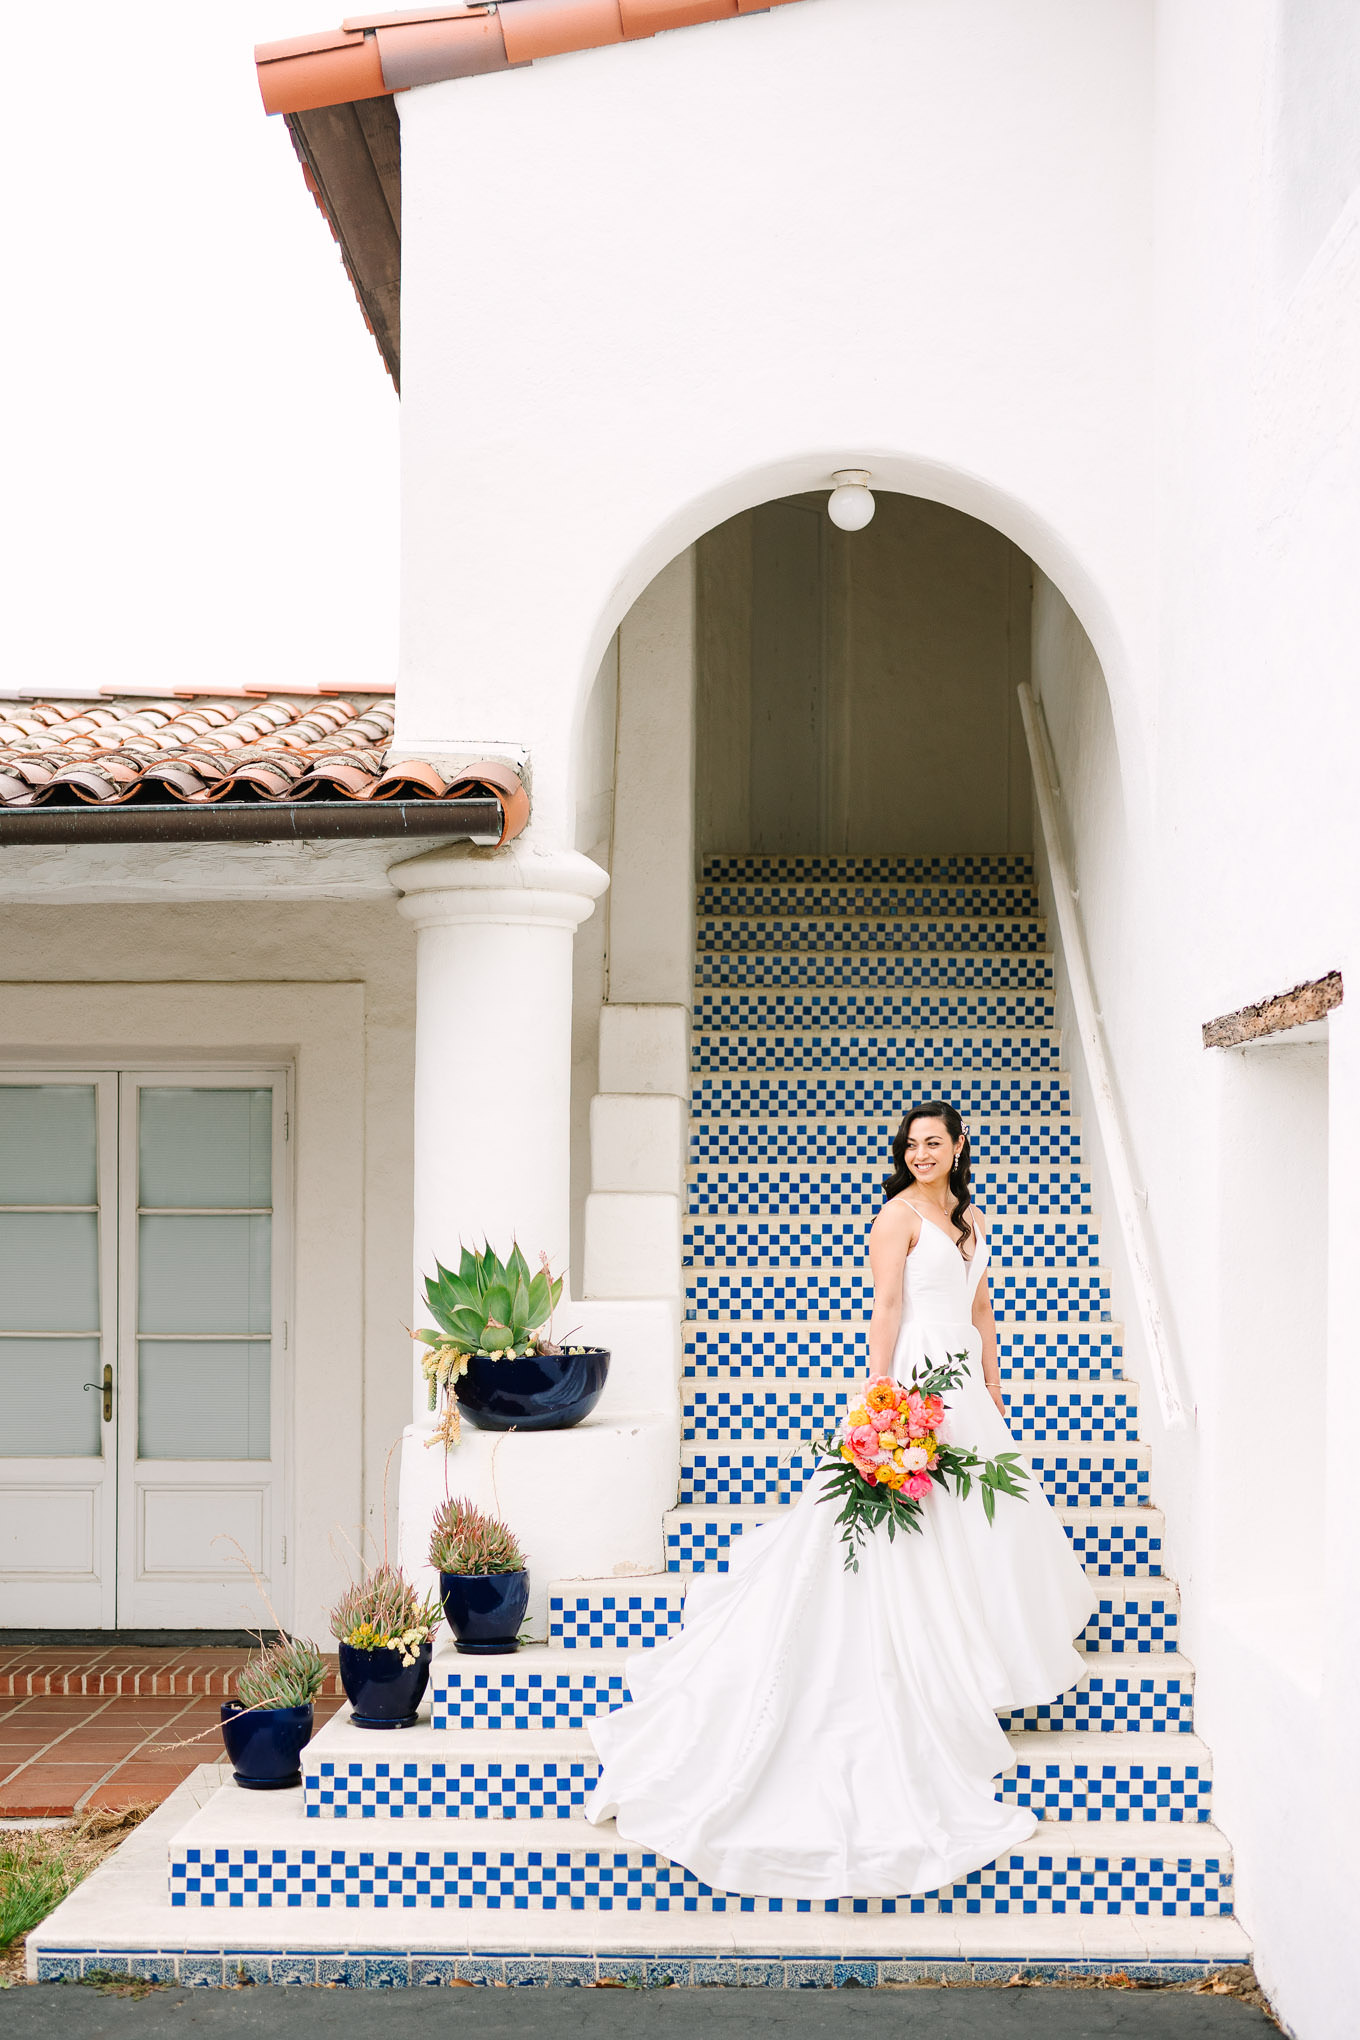 King Gillette Ranch wedding | Wedding and elopement photography roundup | Los Angeles and Palm Springs photographer | #losangeleswedding #palmspringswedding #elopementphotographer Source: Mary Costa Photography | Los Angeles